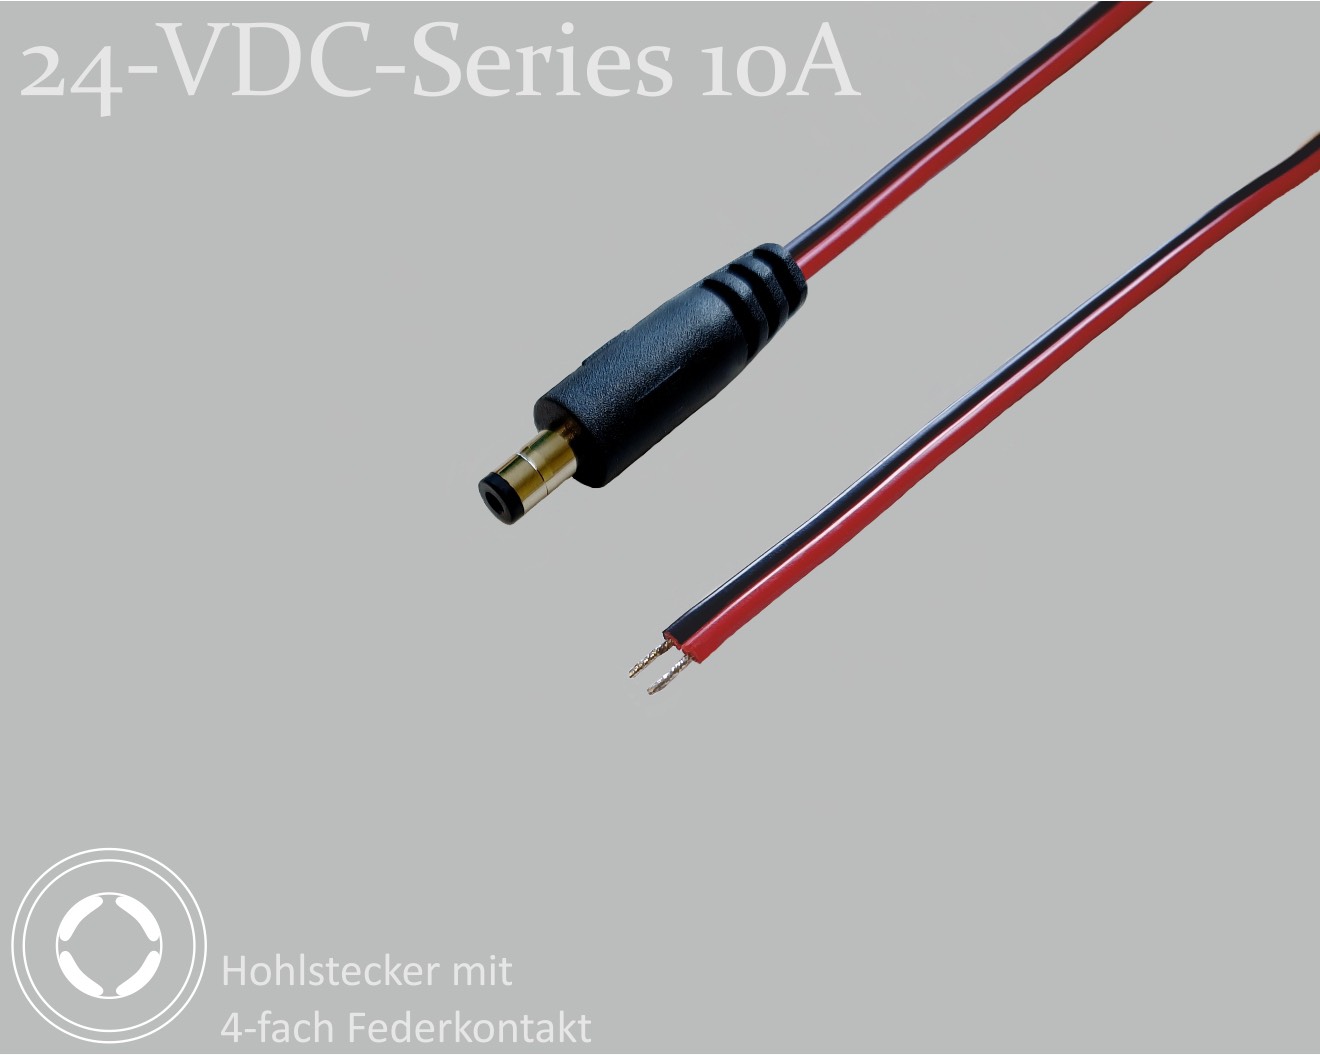 24-VDC-Series 10A, DC connection cable, DC plug with 4-spring contact 2.1x5.5x9.5mm, flat cable 2x0.75mm², red/black, tinned ends, 1.5m